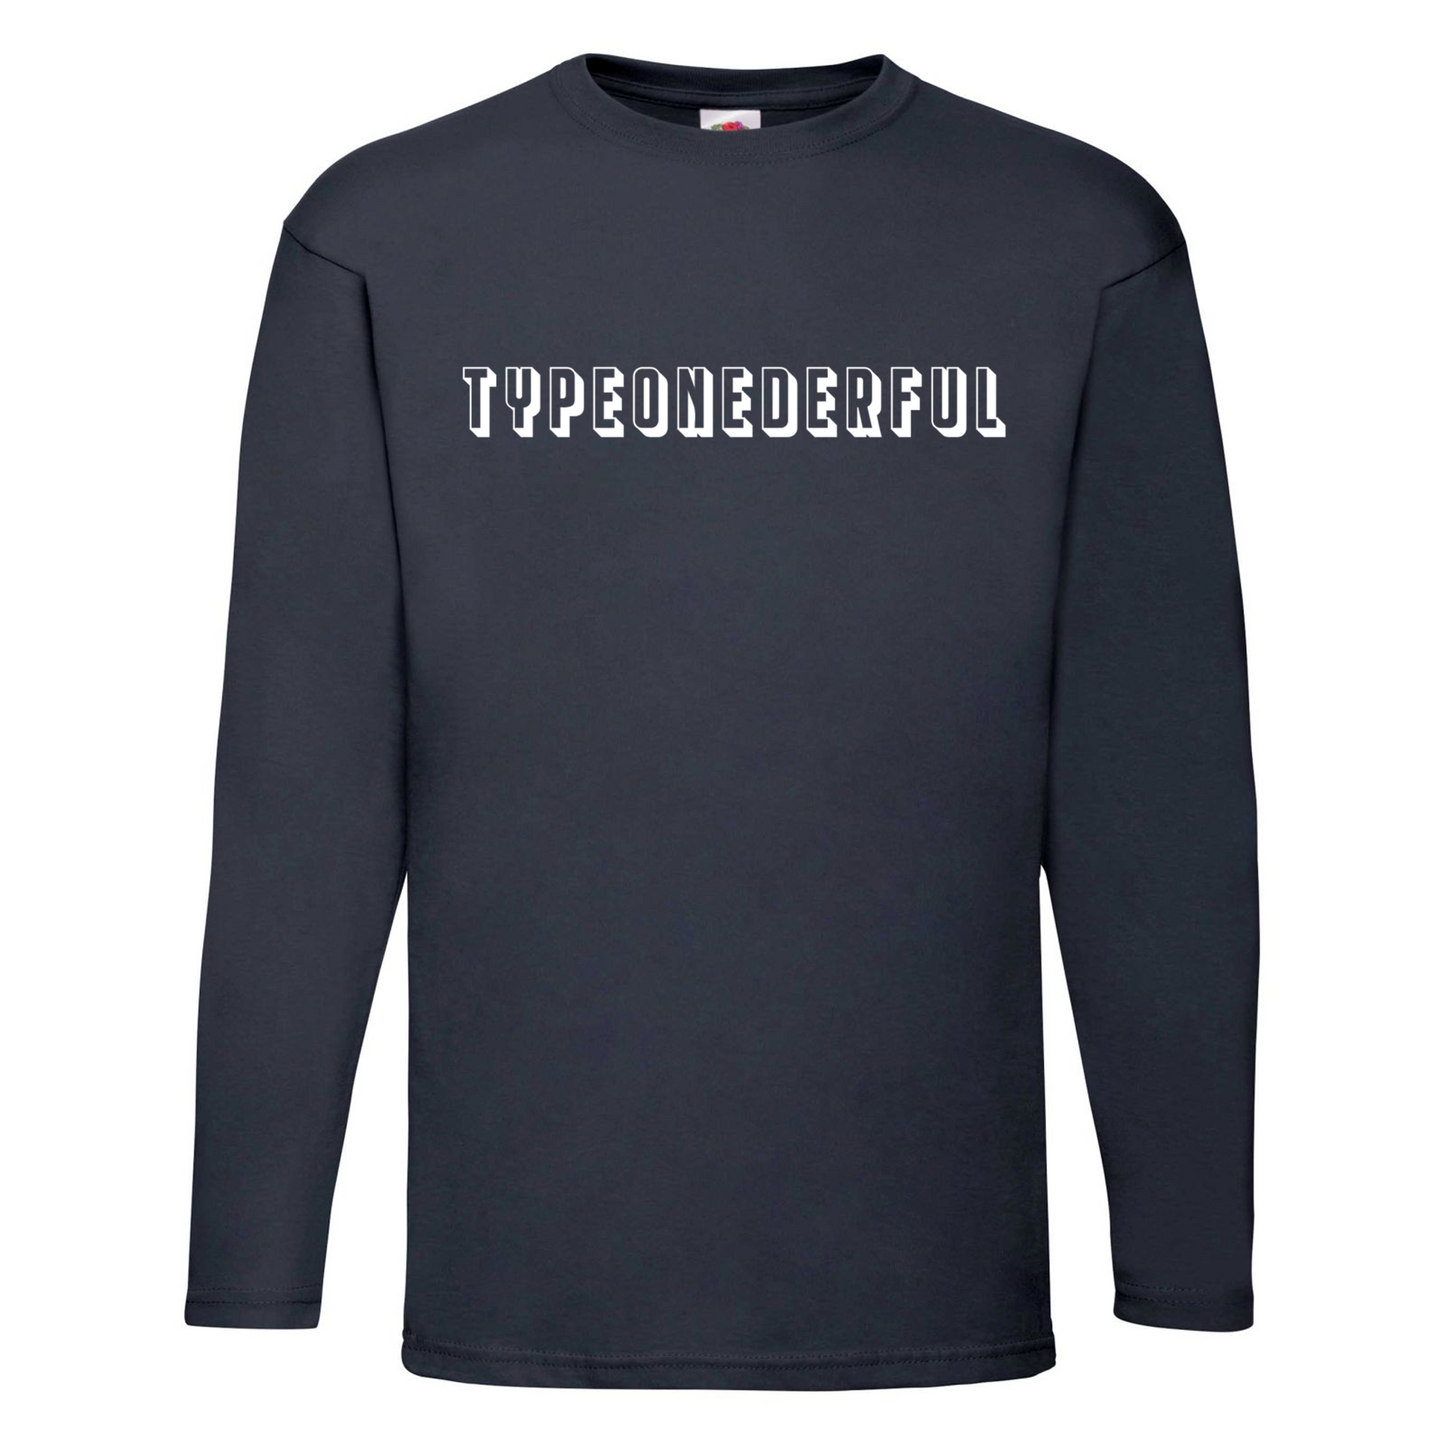 Typeonederful Long Sleeve T Shirt